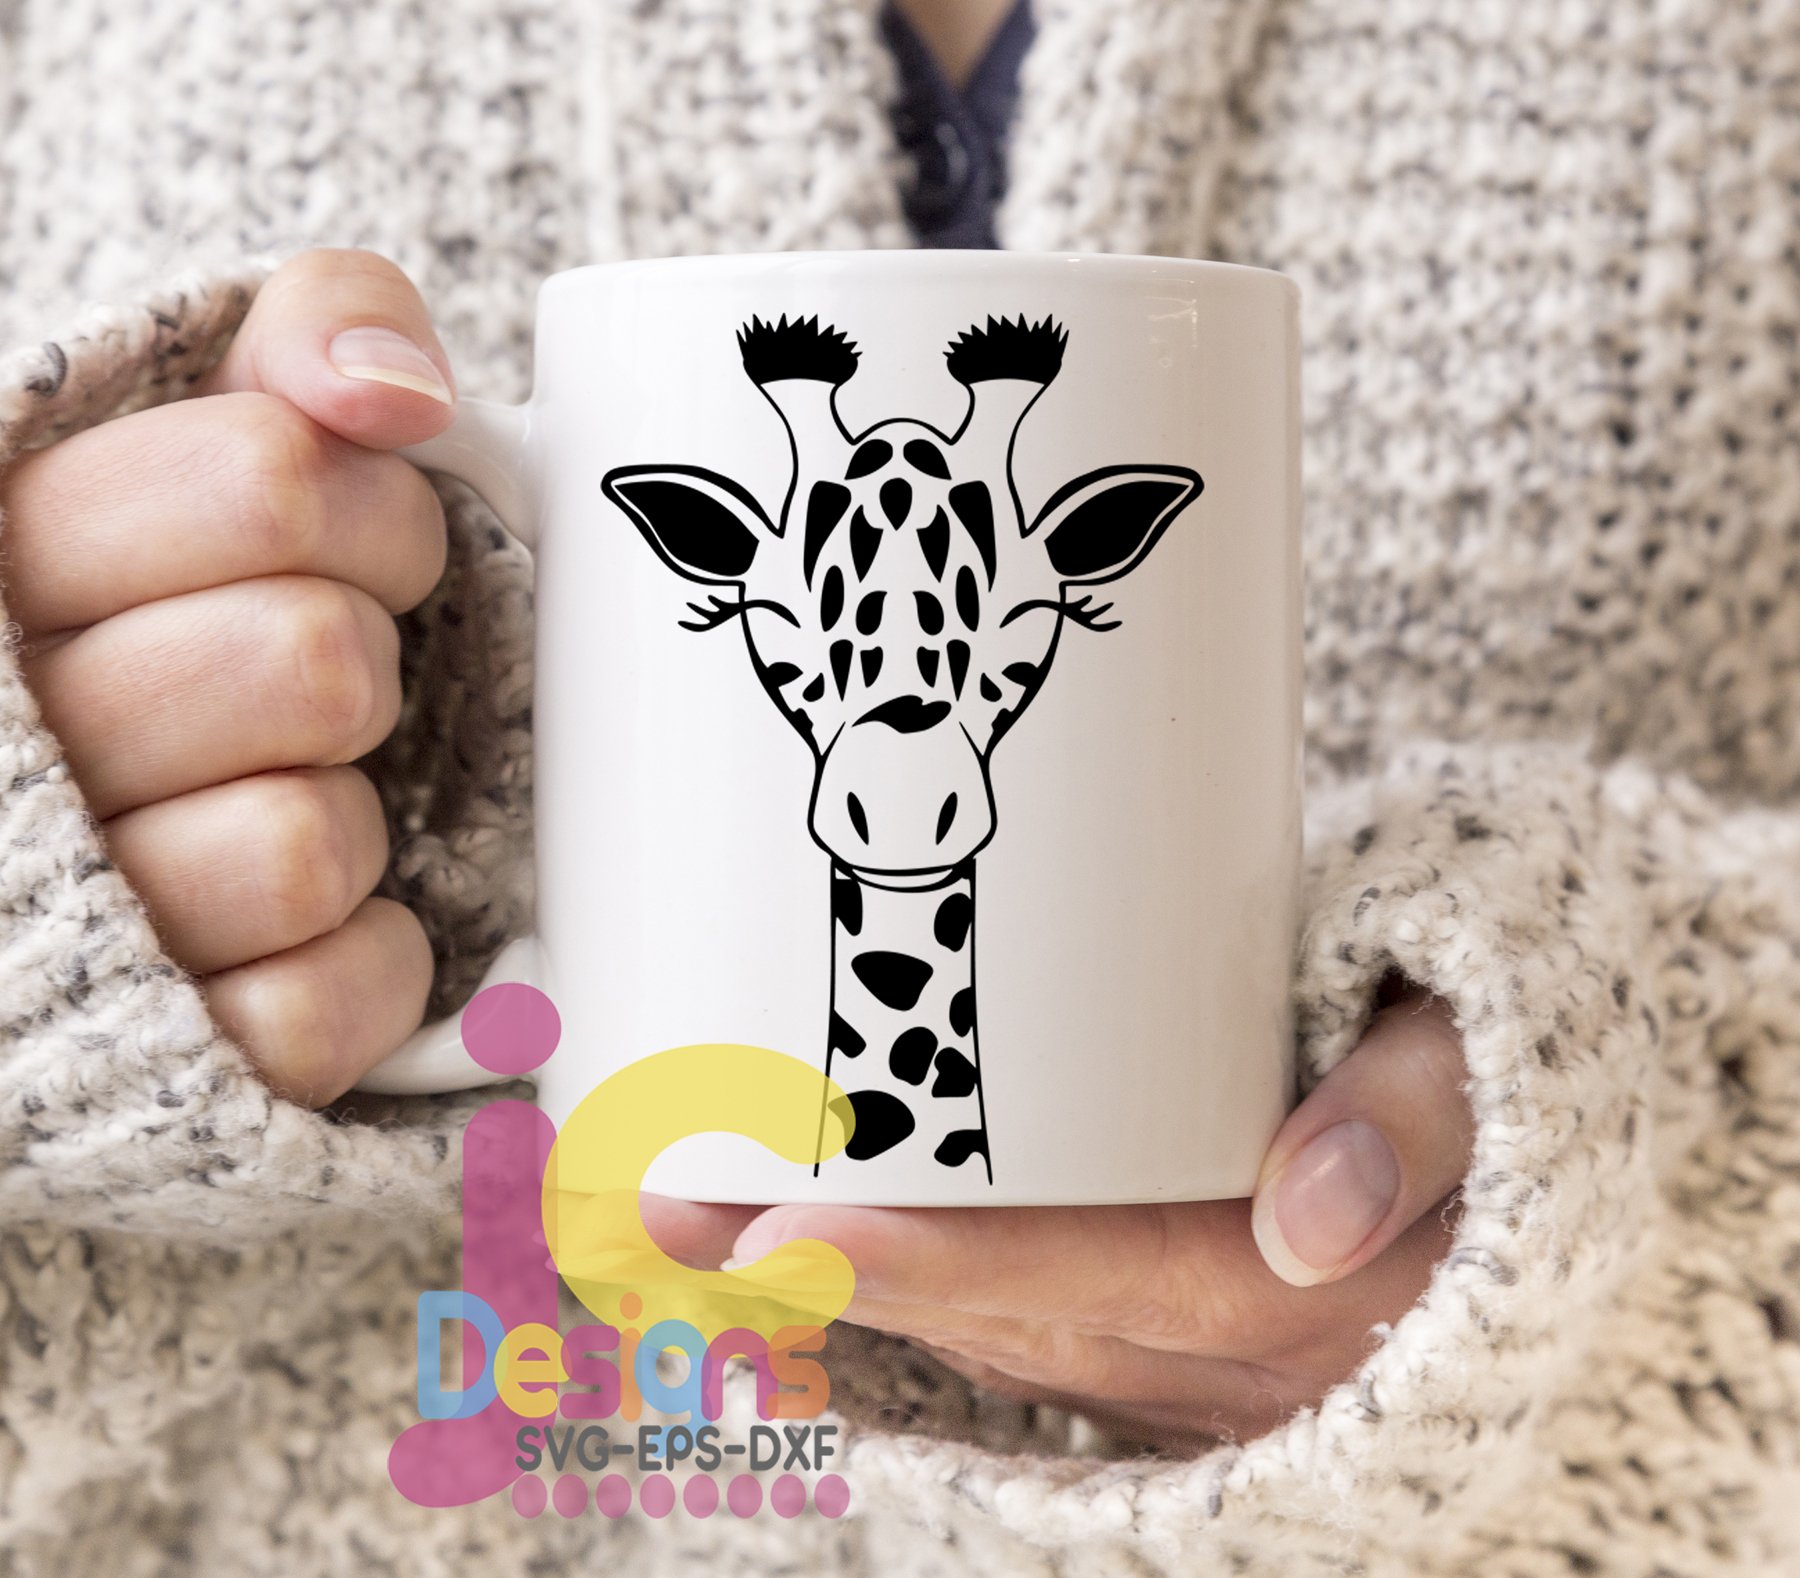 Person holding a coffee mug with a giraffe design on it.